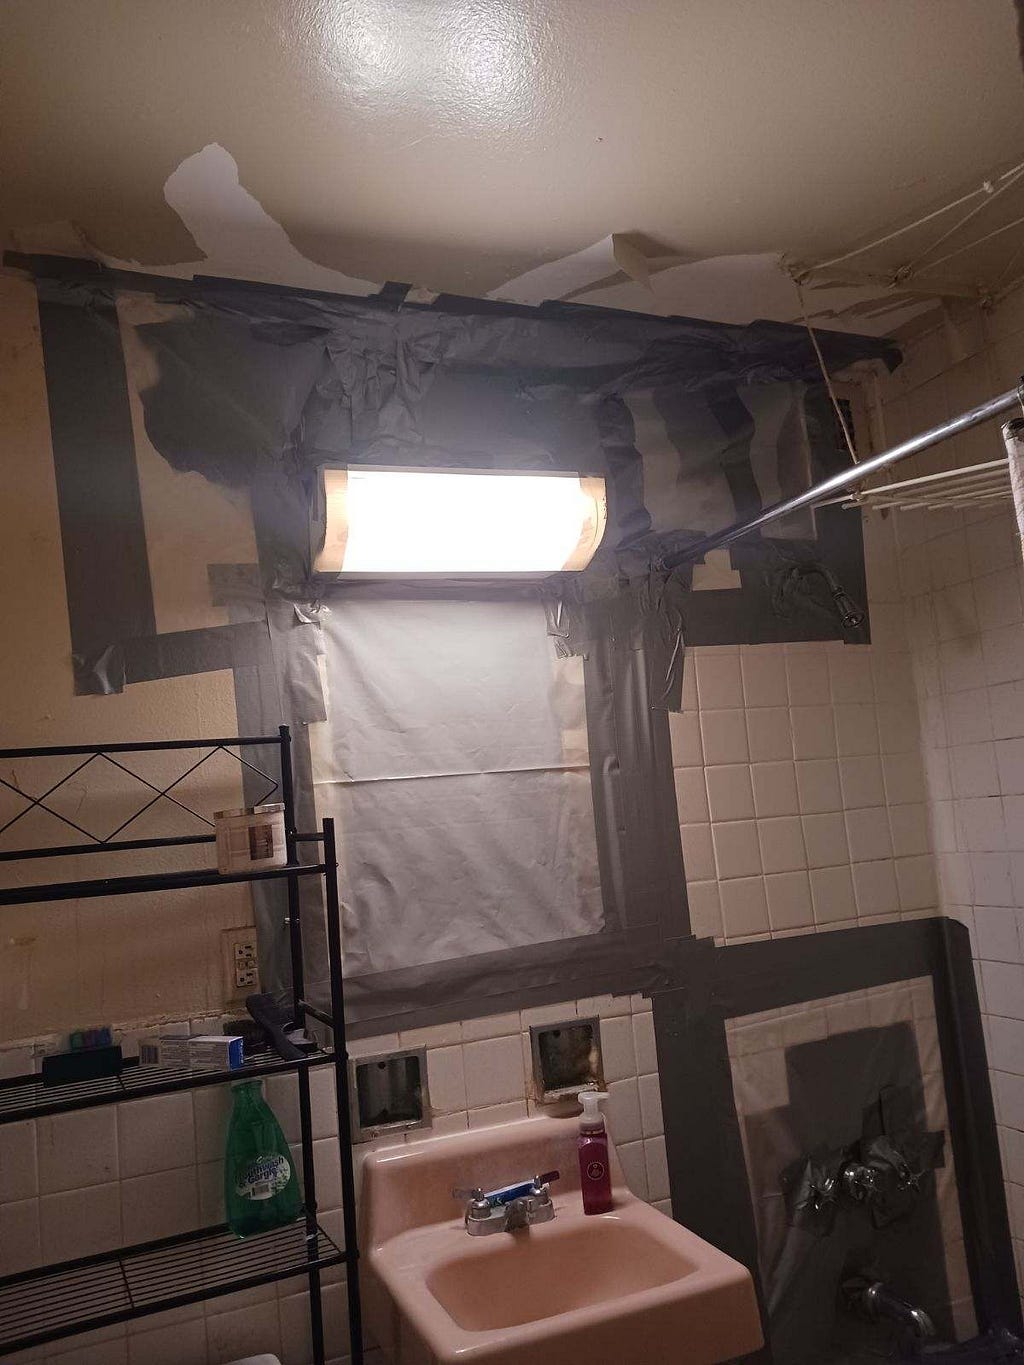 The wall of a bathroom covered in tape, indicating cutting through the wall done for repairs.